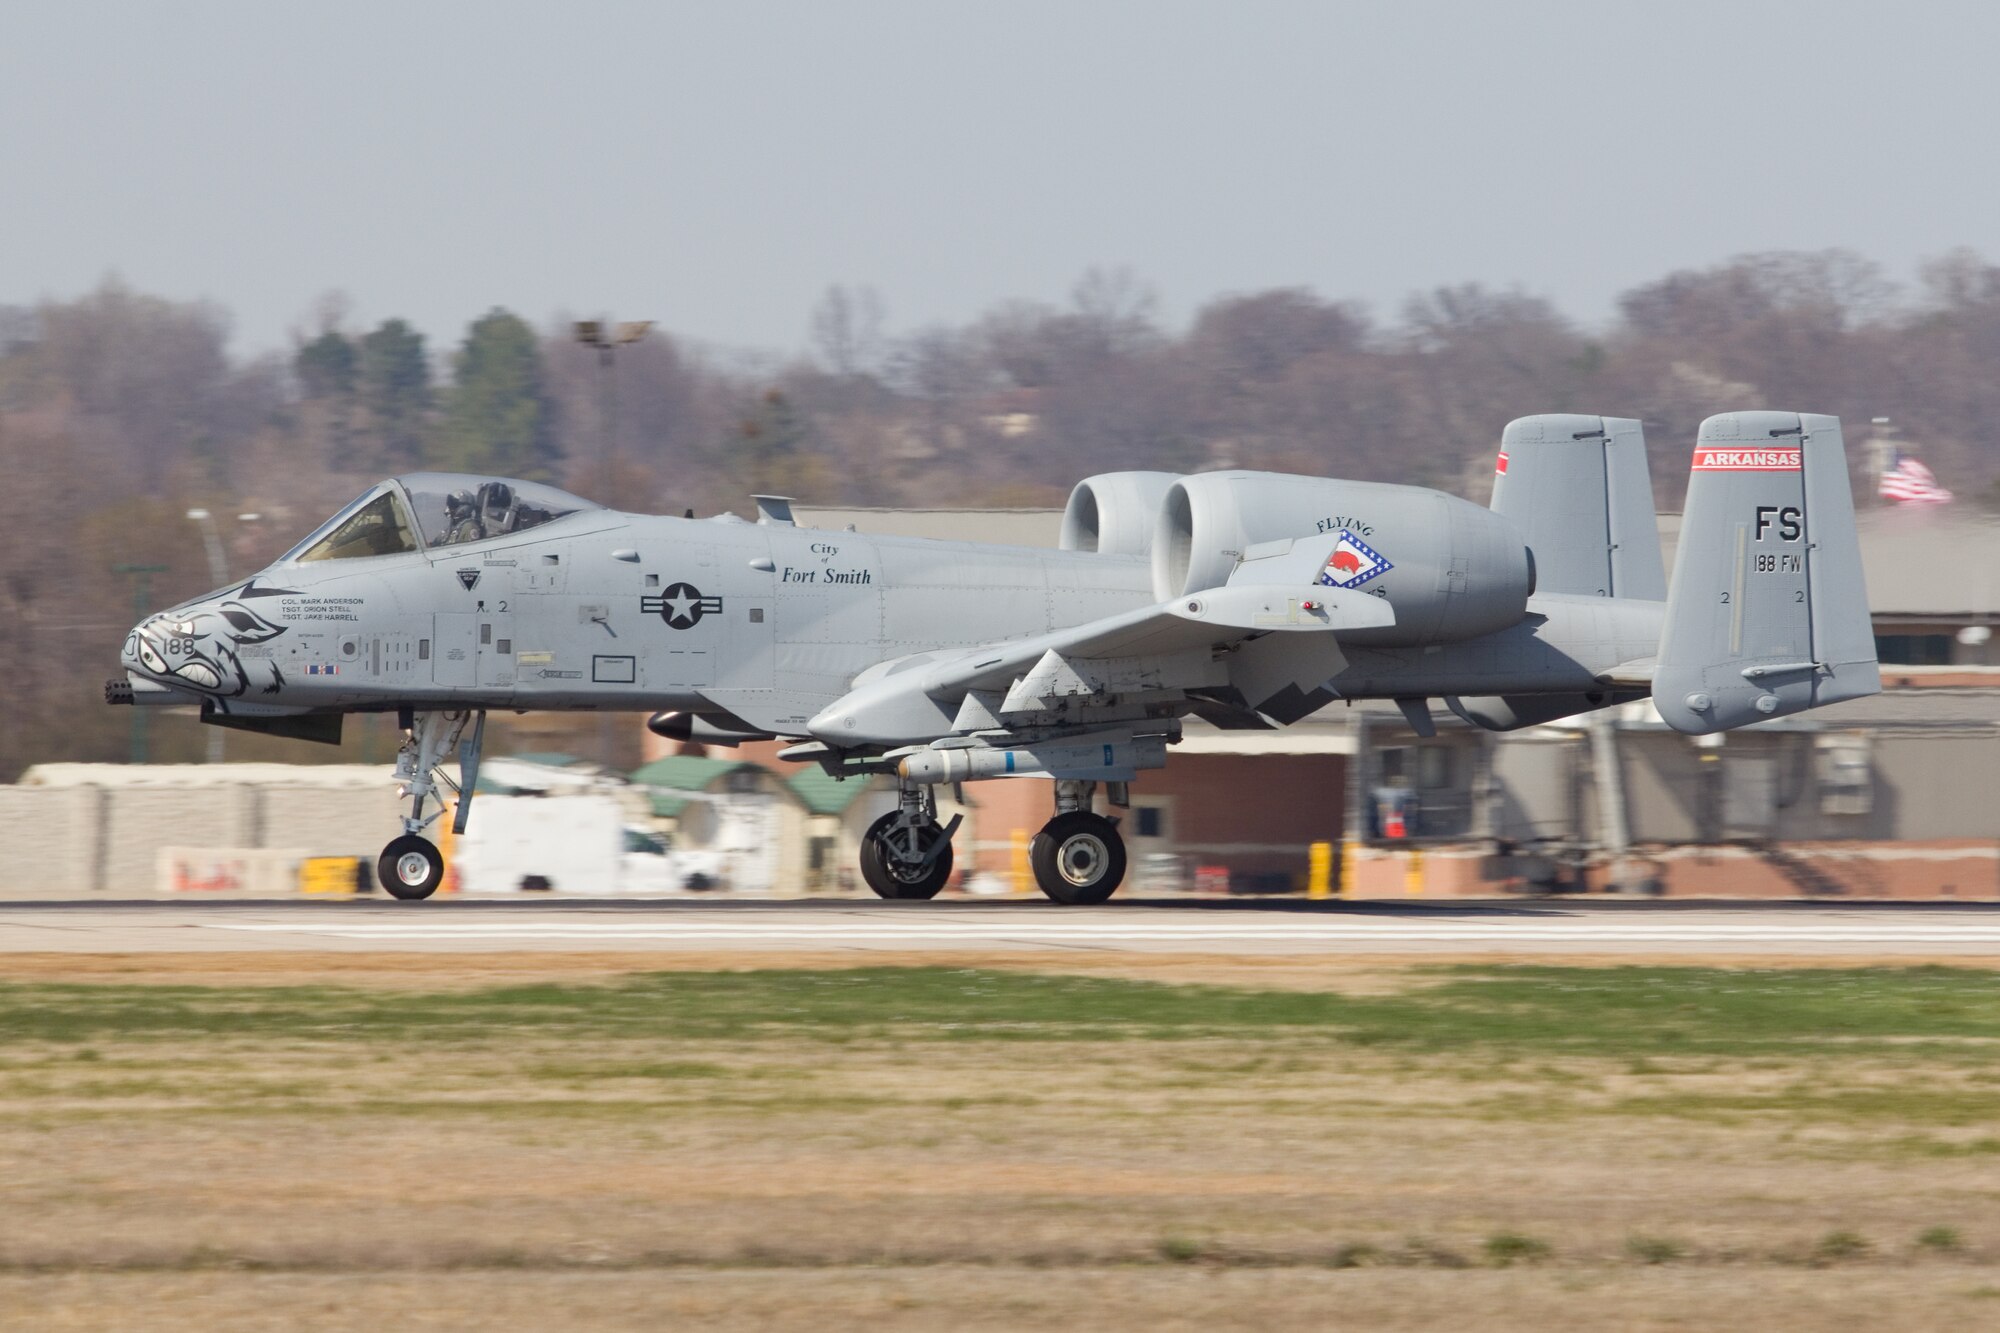 Maj. Doug Davis, a pilot with the 188th Fighter Wing, returns to Ebbing Air National Guard Base, Fort Smith, Ark., following training at the 188th’s Detachment 1 Razorback Range March 25, 2014. The sortie marked his fini flight in the A-10C Thunderbolt II “Warthog.” Davis is the 188th Detachment 1 commander. (Courtesy photo by Nick Thomas)